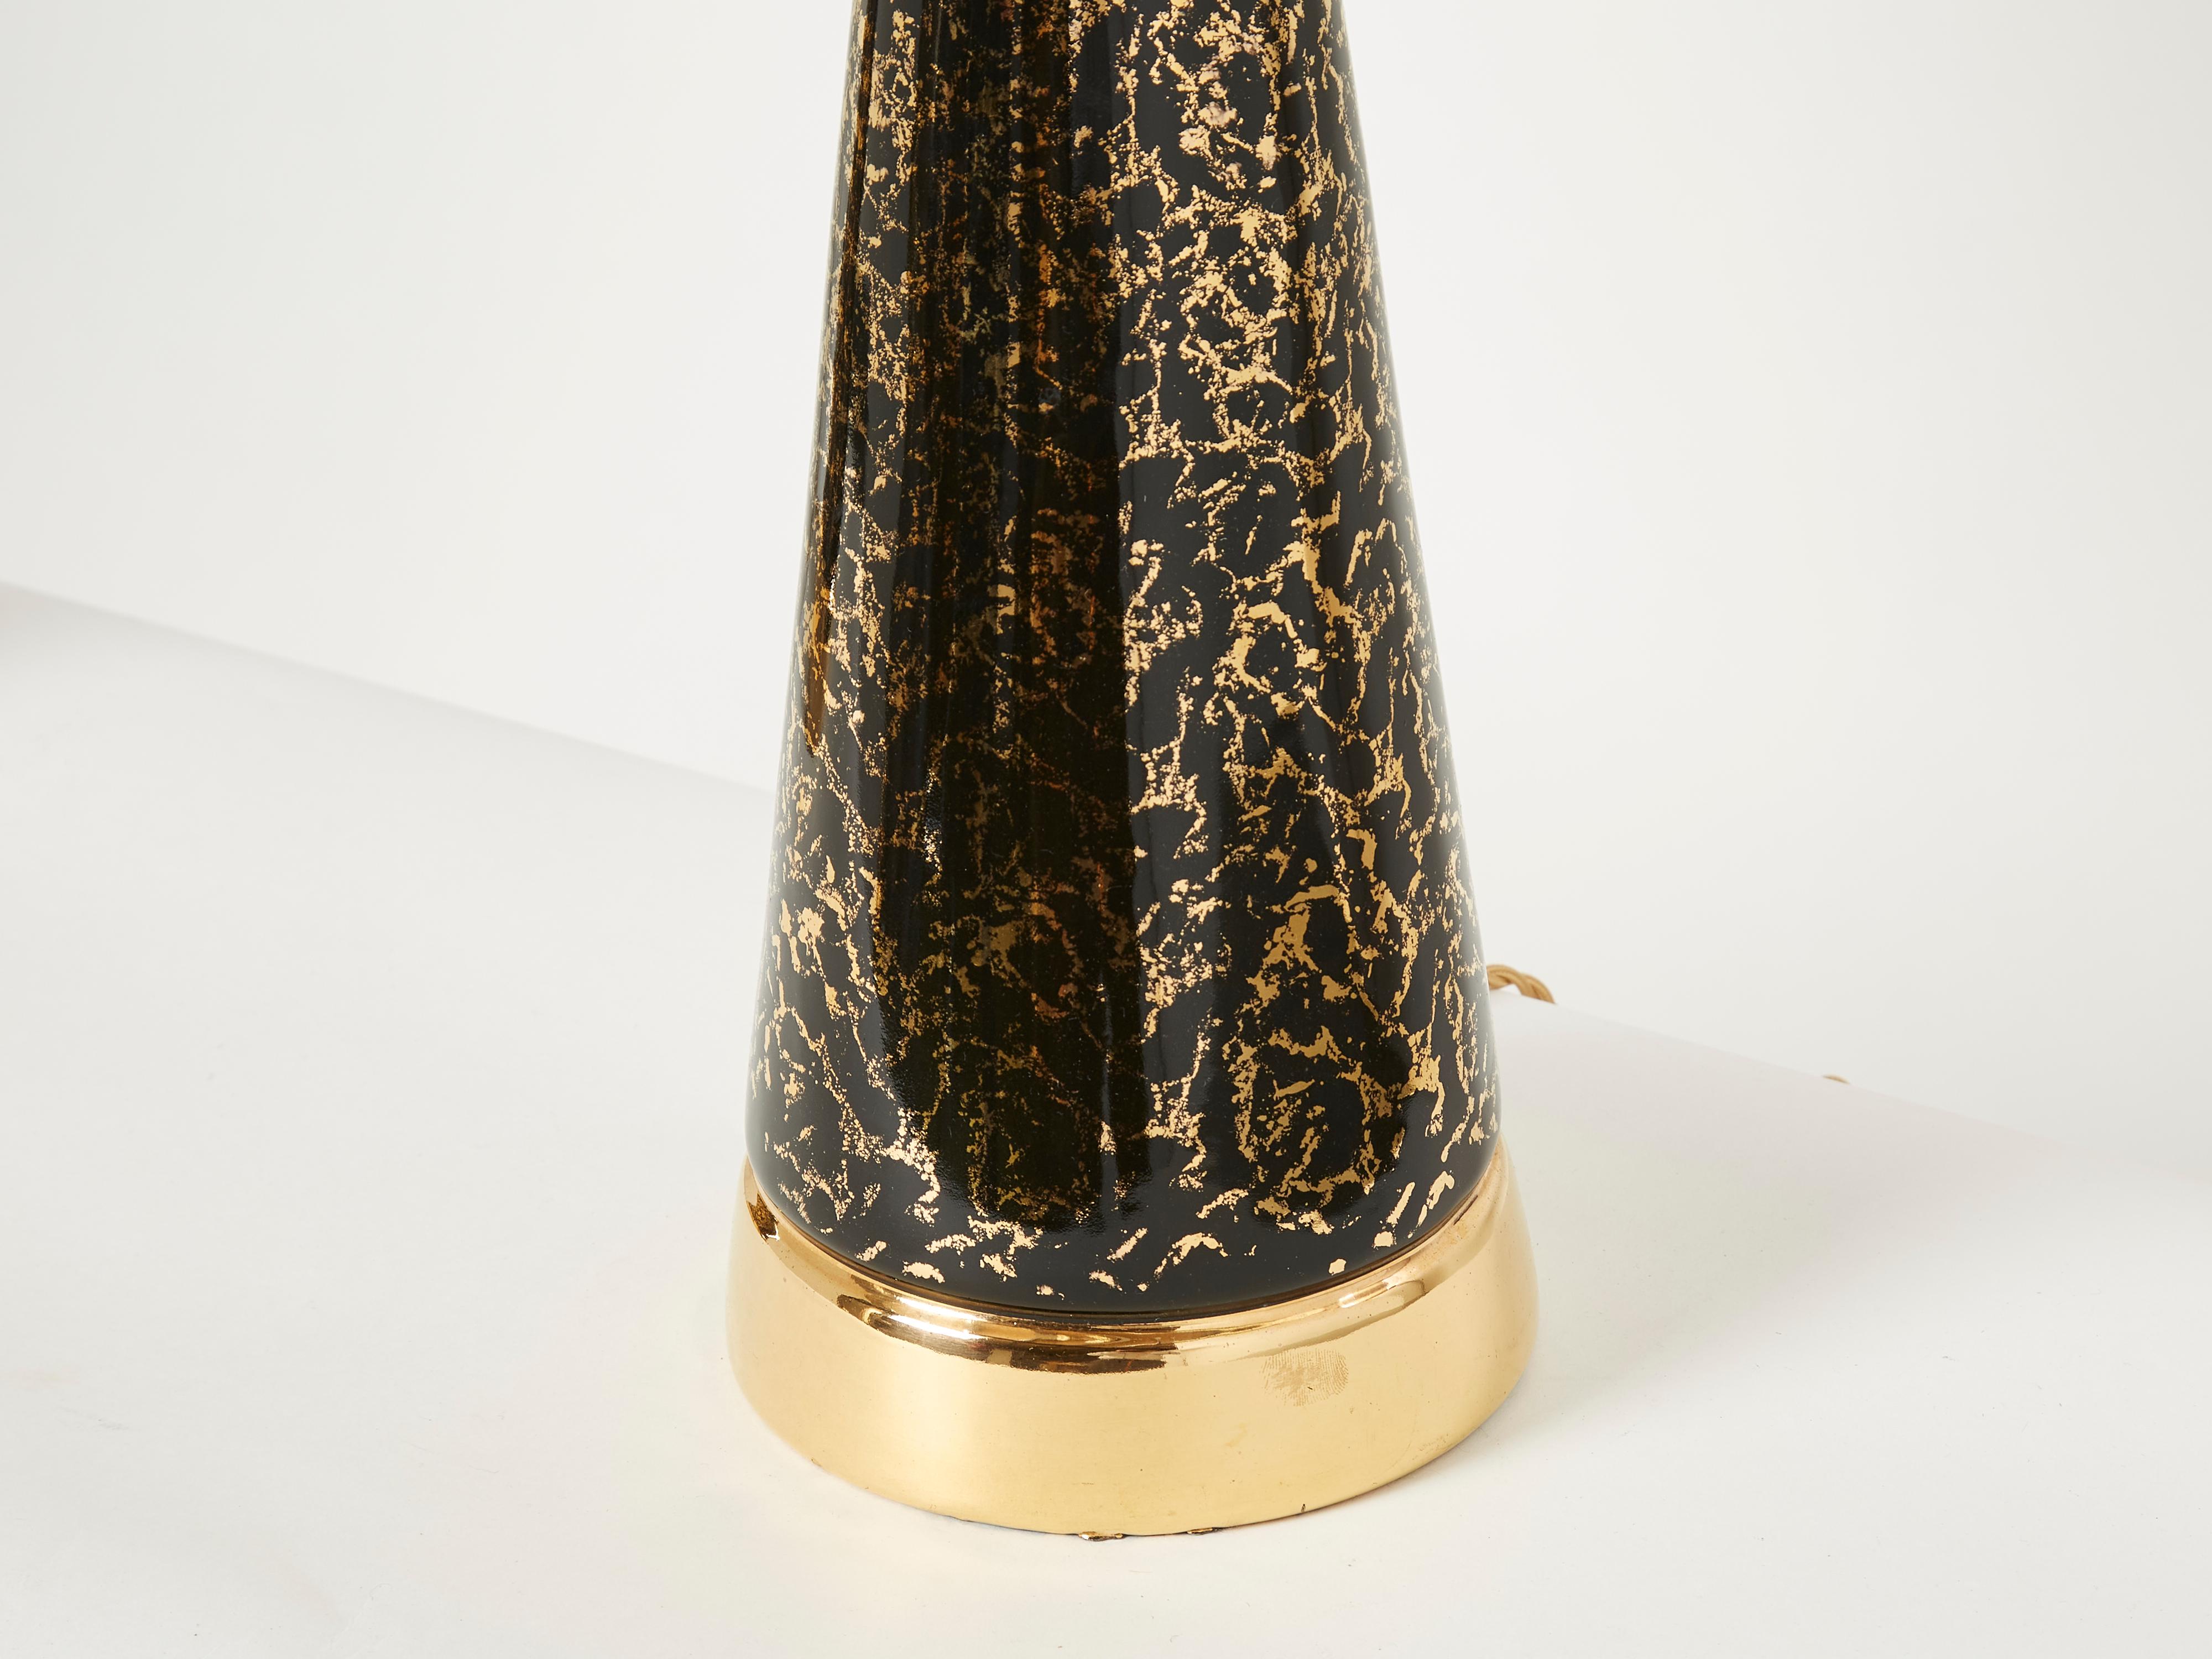 All understated luxury, this pair of 1970s French table lamps boast the exquisite craftsmanship characteristic of mid-century french ceramics. Featuring elegantly rounded curves with distinguished brass feet, the black and gold ceramic subtly